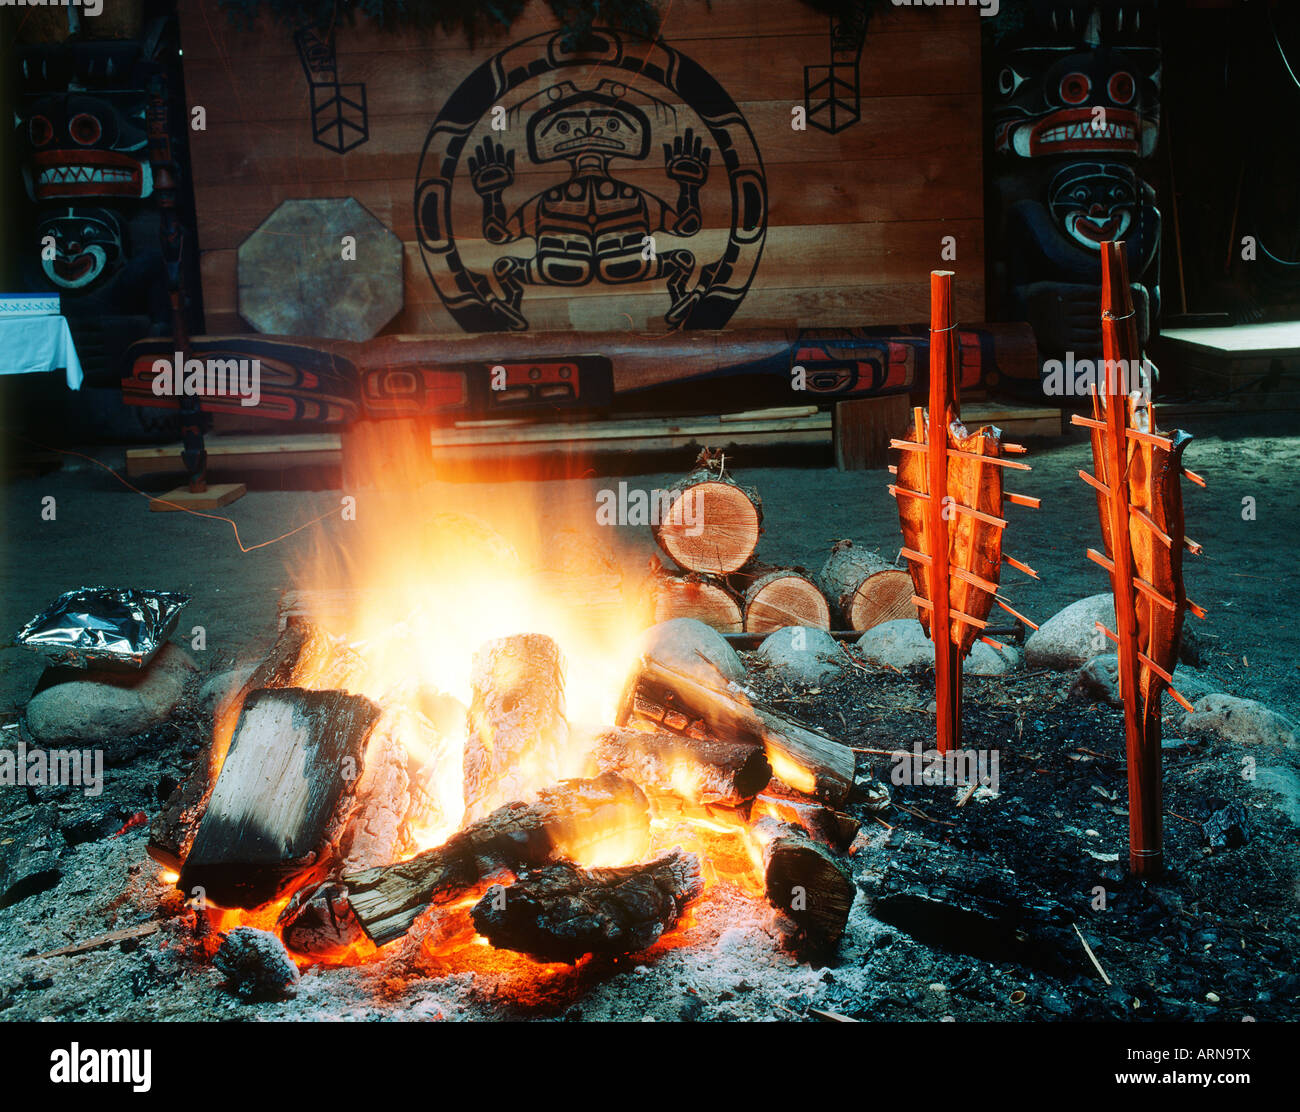 First Nations culture, Mungo Martin House, open fire with salmon on cedar stakes, British Columbia, Canada. Stock Photo